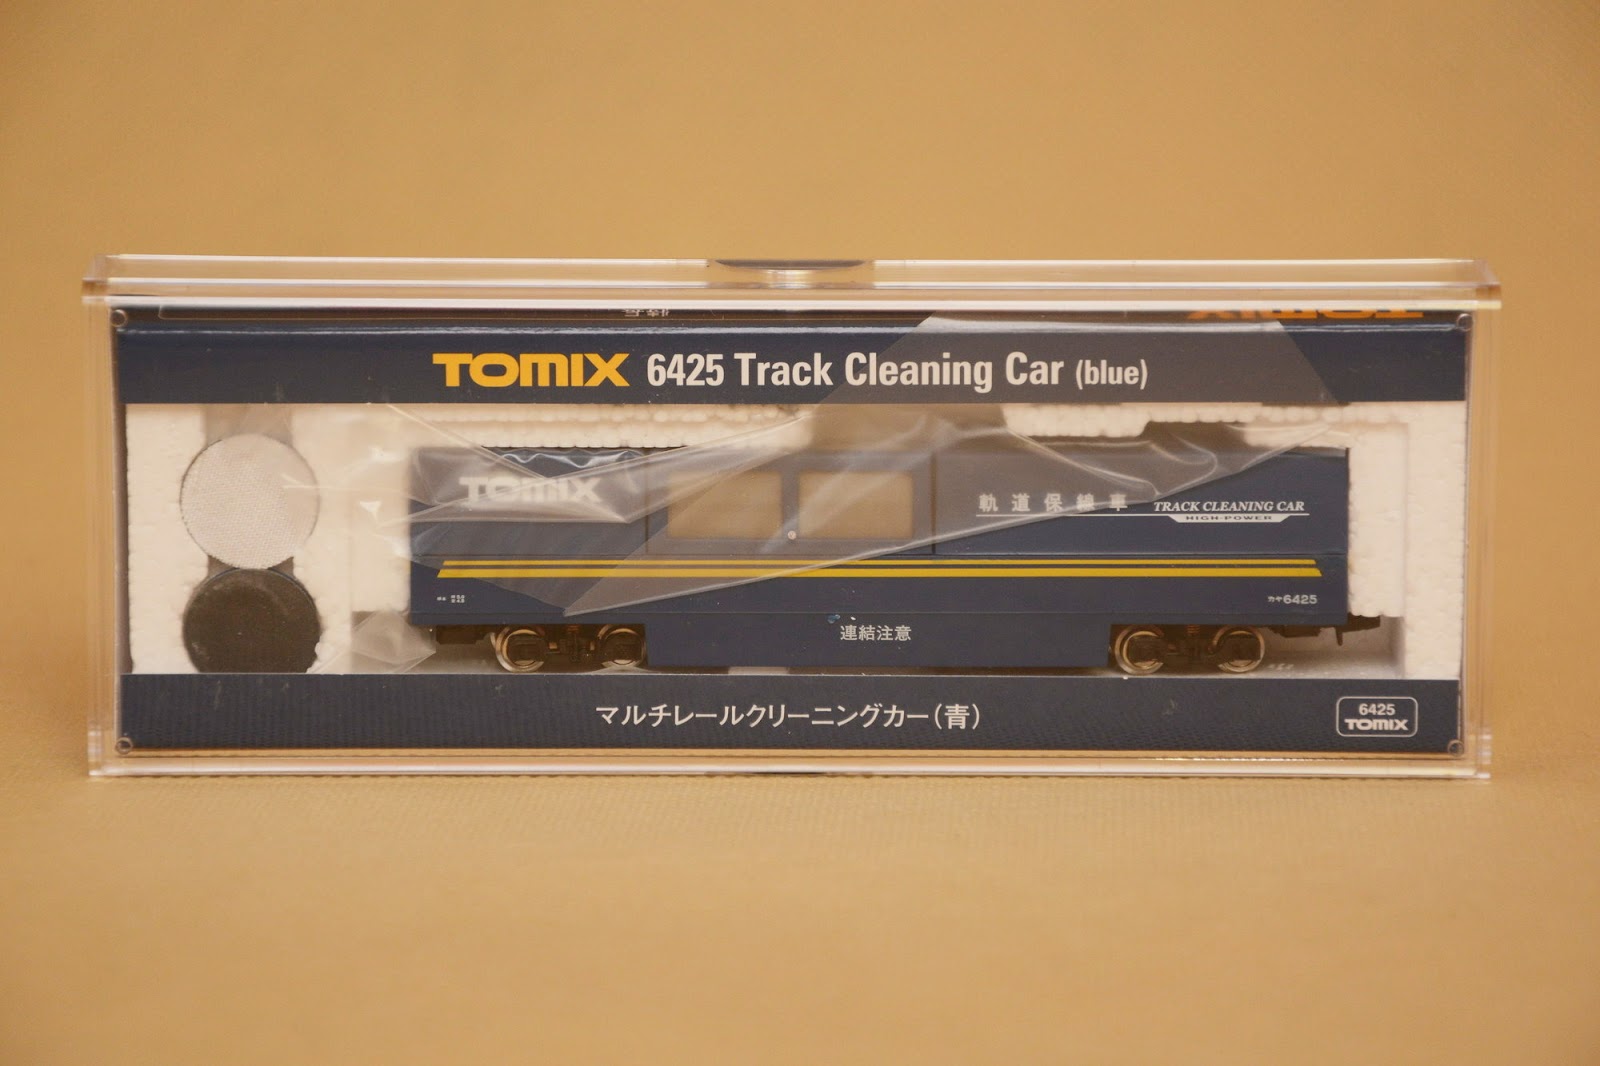 Tomix 6423 Use for Cleaning Car N Gauge 